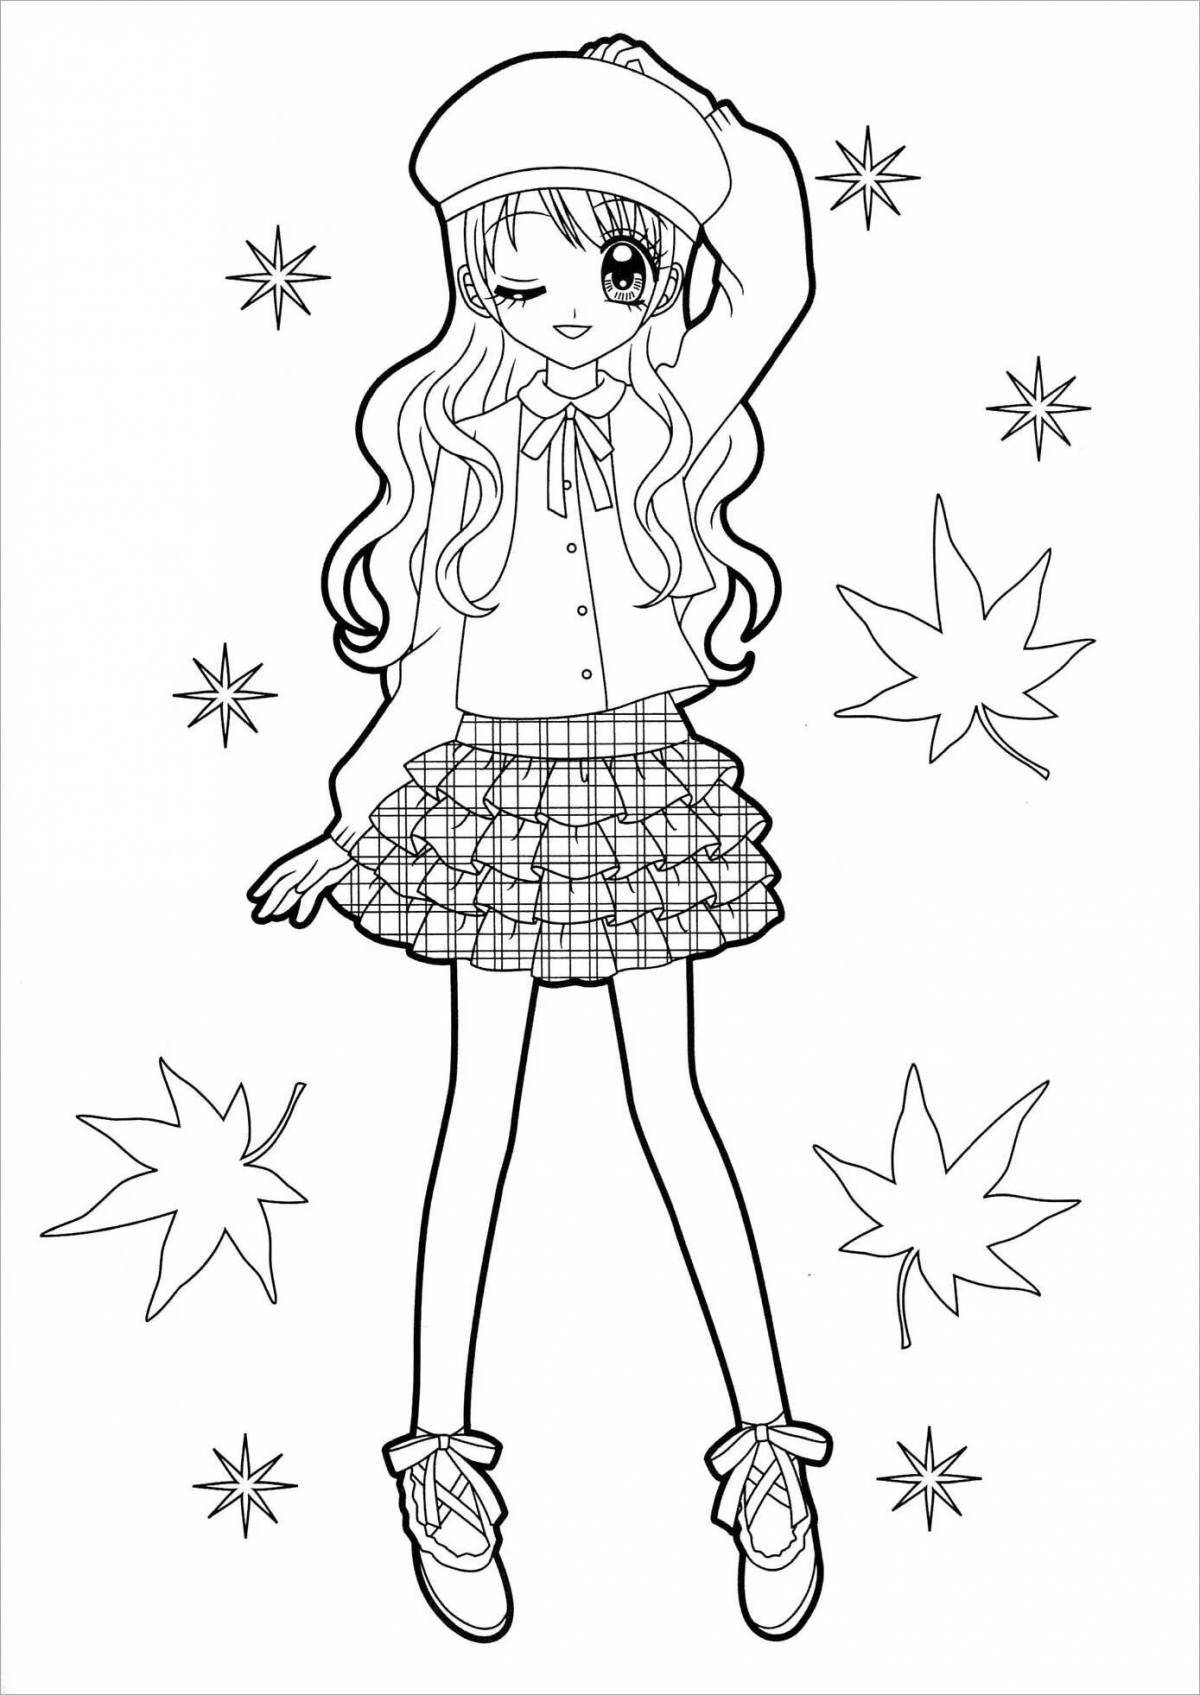 Creative new year anime coloring book